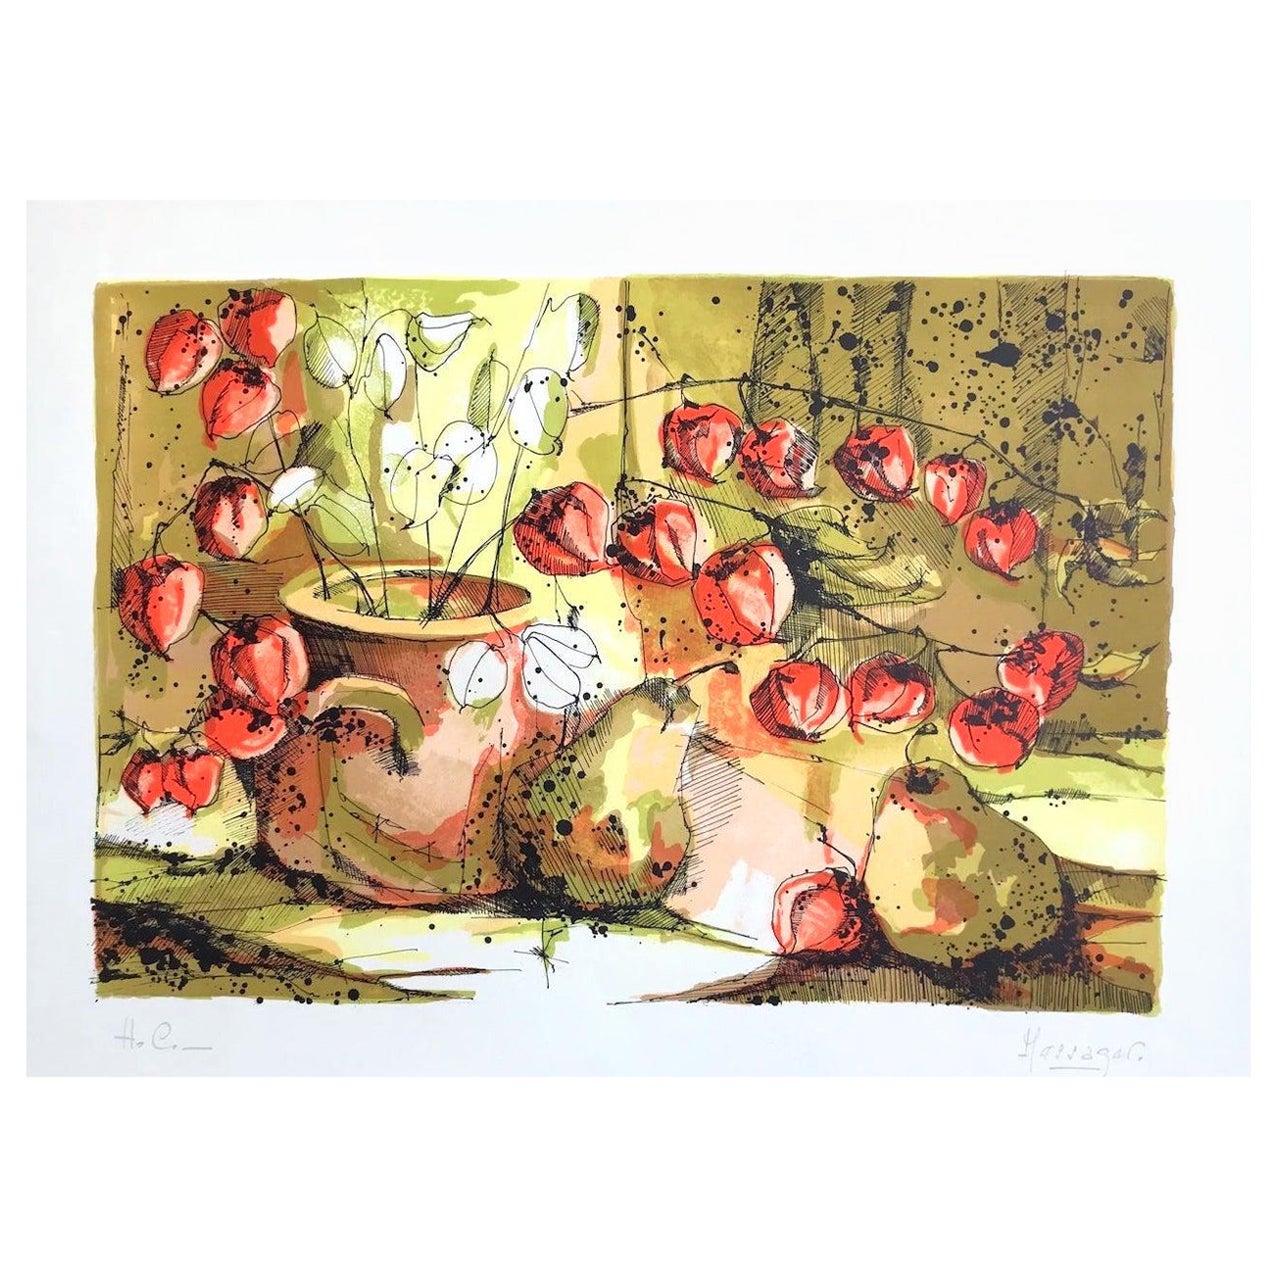 Unknown Interior Print - Chinese Lantern Flowers with Pears, Signed Lithograph, Sunlit Window Still Life